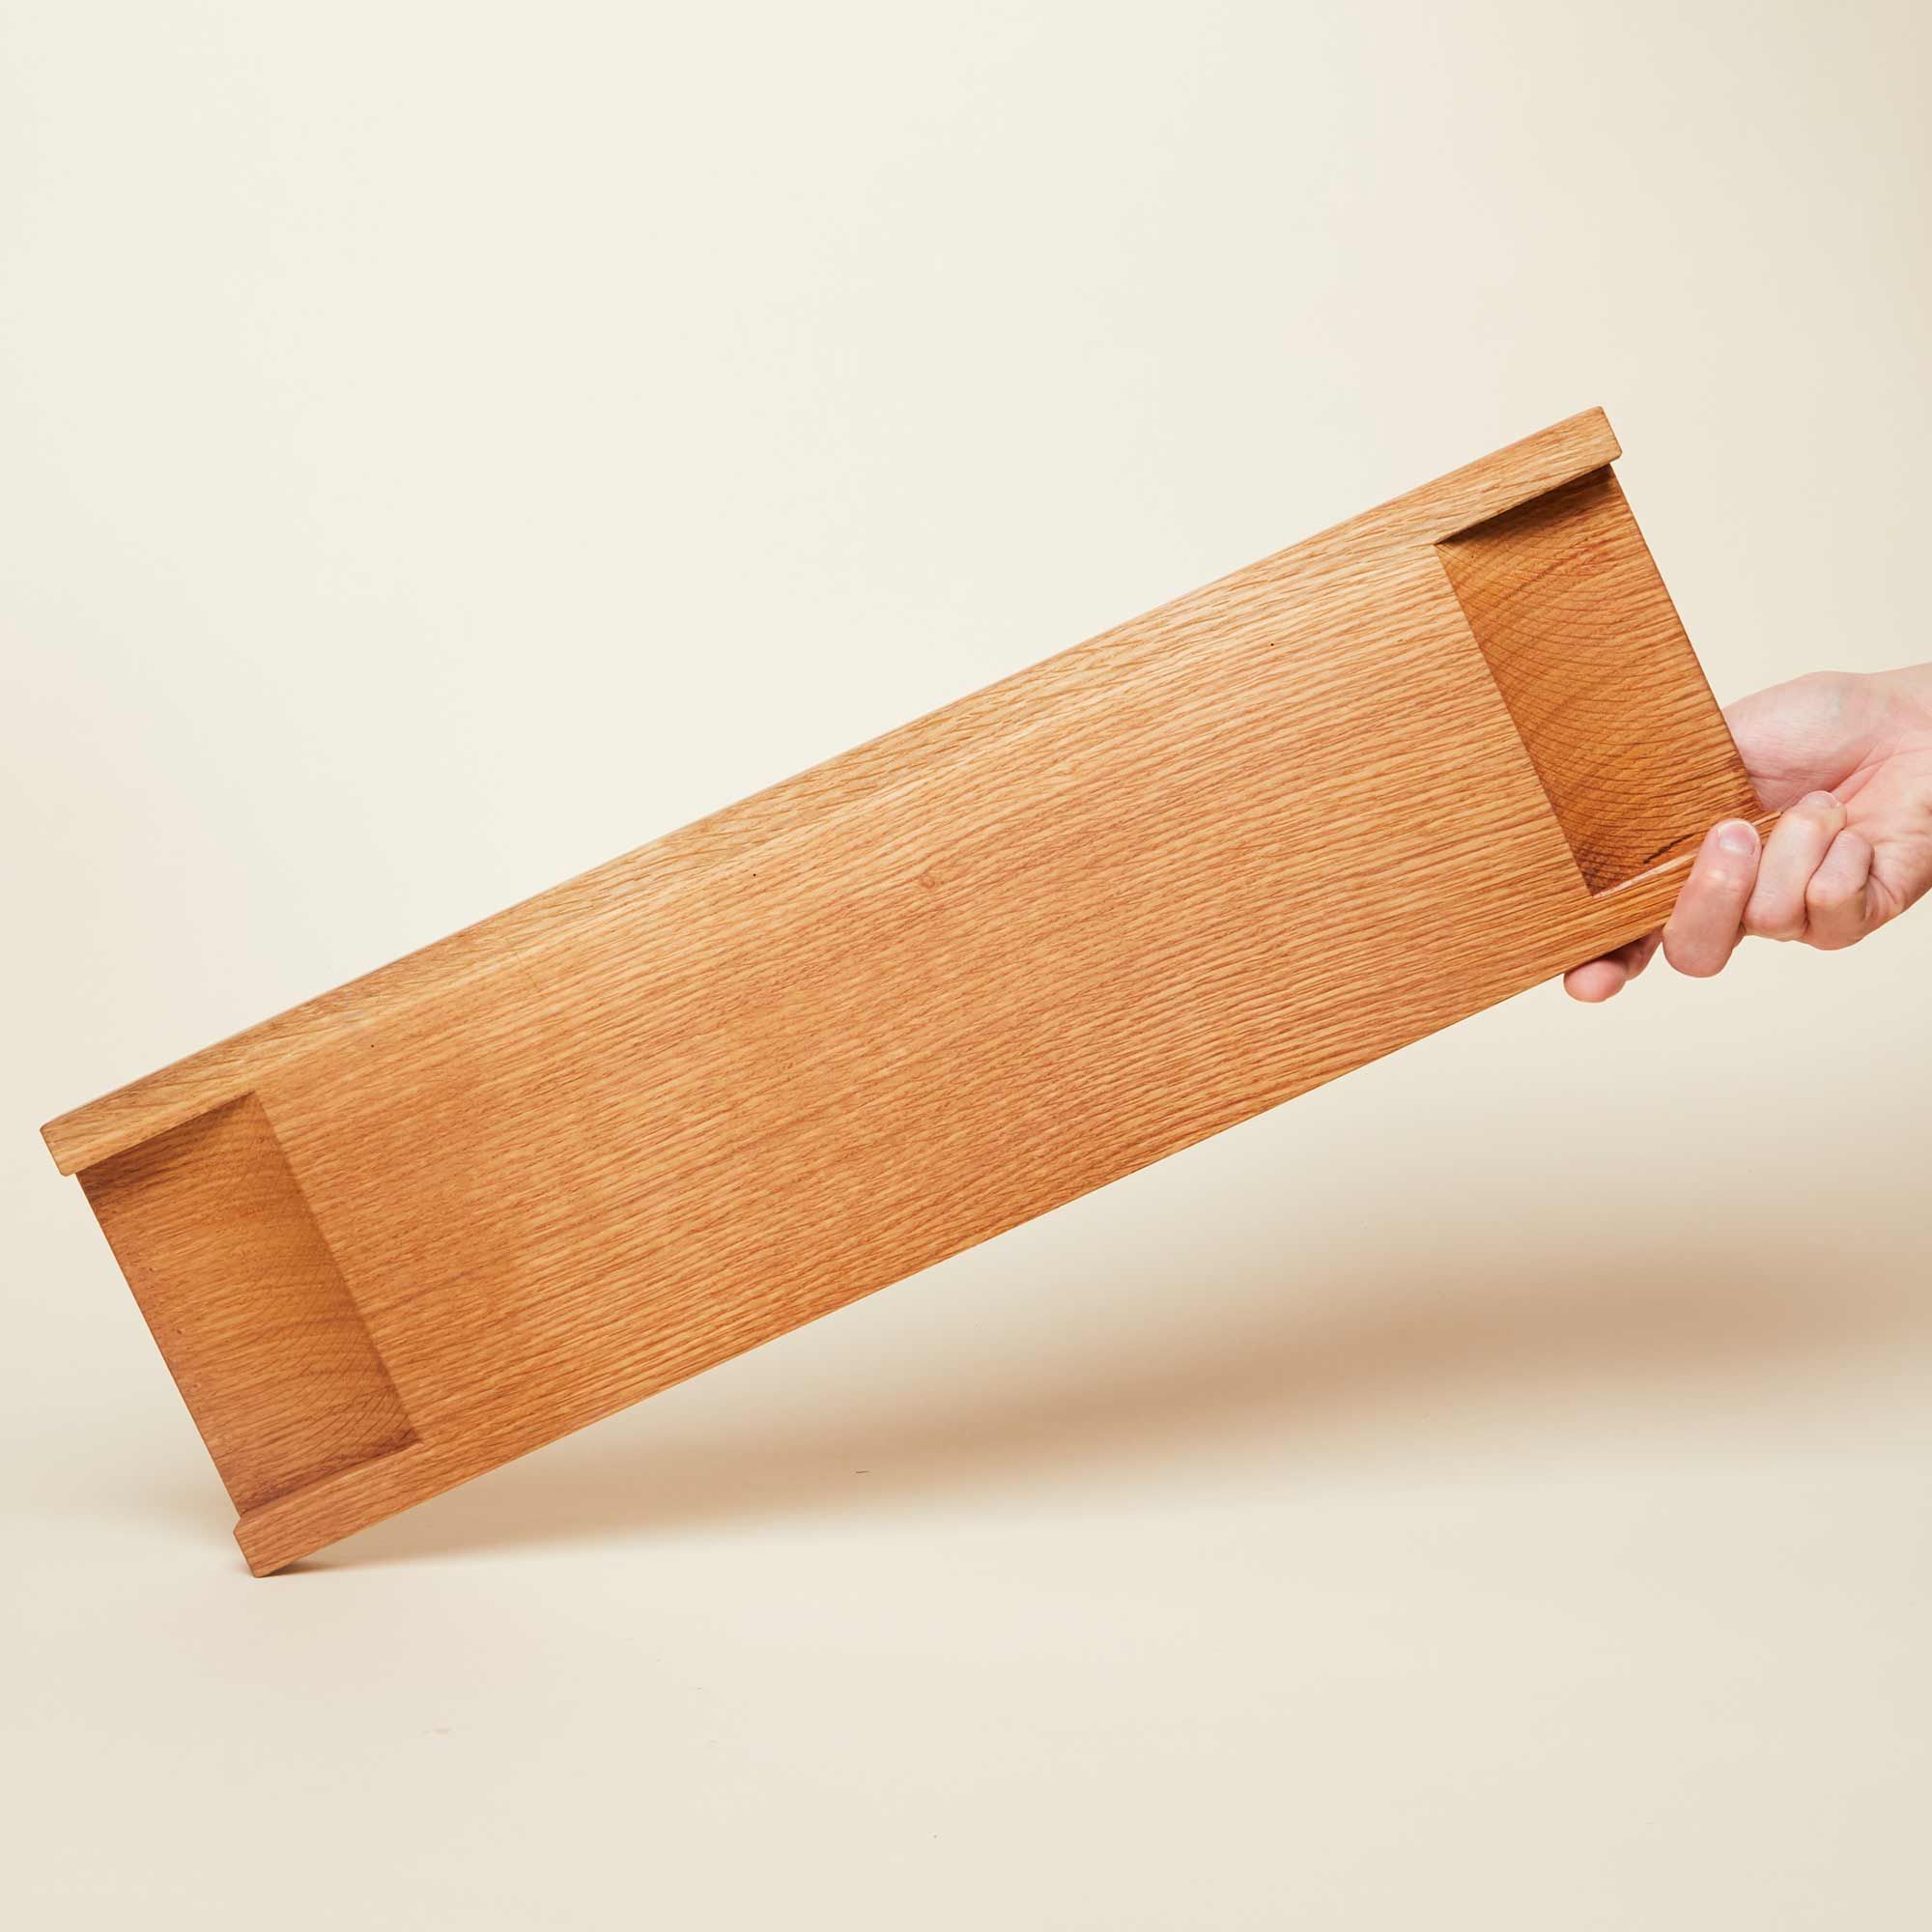 Underside of charcuterie board with handles and a hand holding the board at an angle